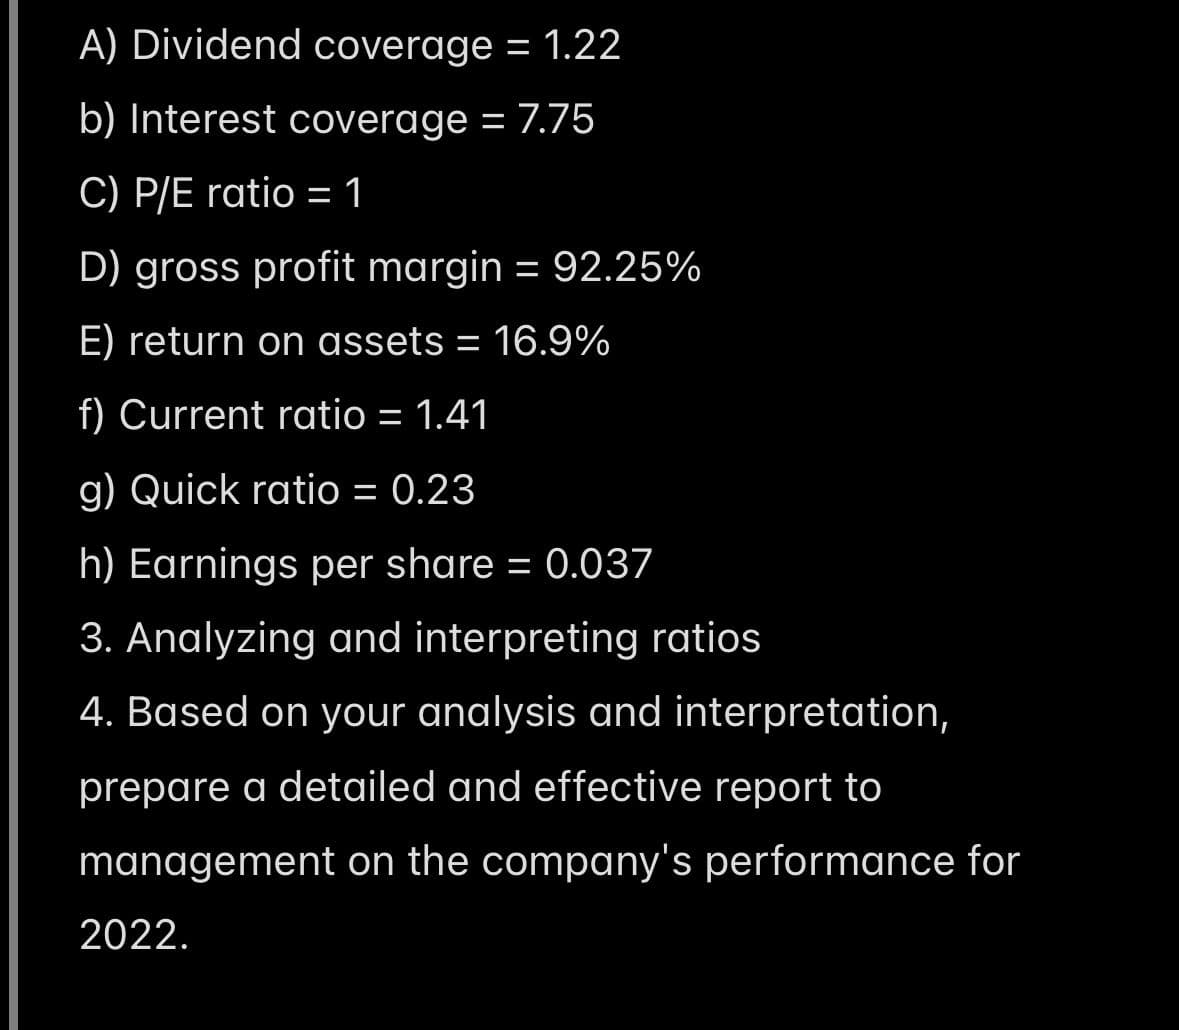 A) Dividend coverage = 1.22
b) Interest coverage = 7.75
C) P/E ratio = 1
D) gross profit margin = 92.25%
E) return on assets = 16.9%
f) Current ratio = 1.41
g) Quick ratio = 0.23
h) Earnings per share = 0.037
3. Analyzing and interpreting ratios
4. Based on your analysis and interpretation,
prepare a detailed and effective report to
management on the company's performance for
2022.